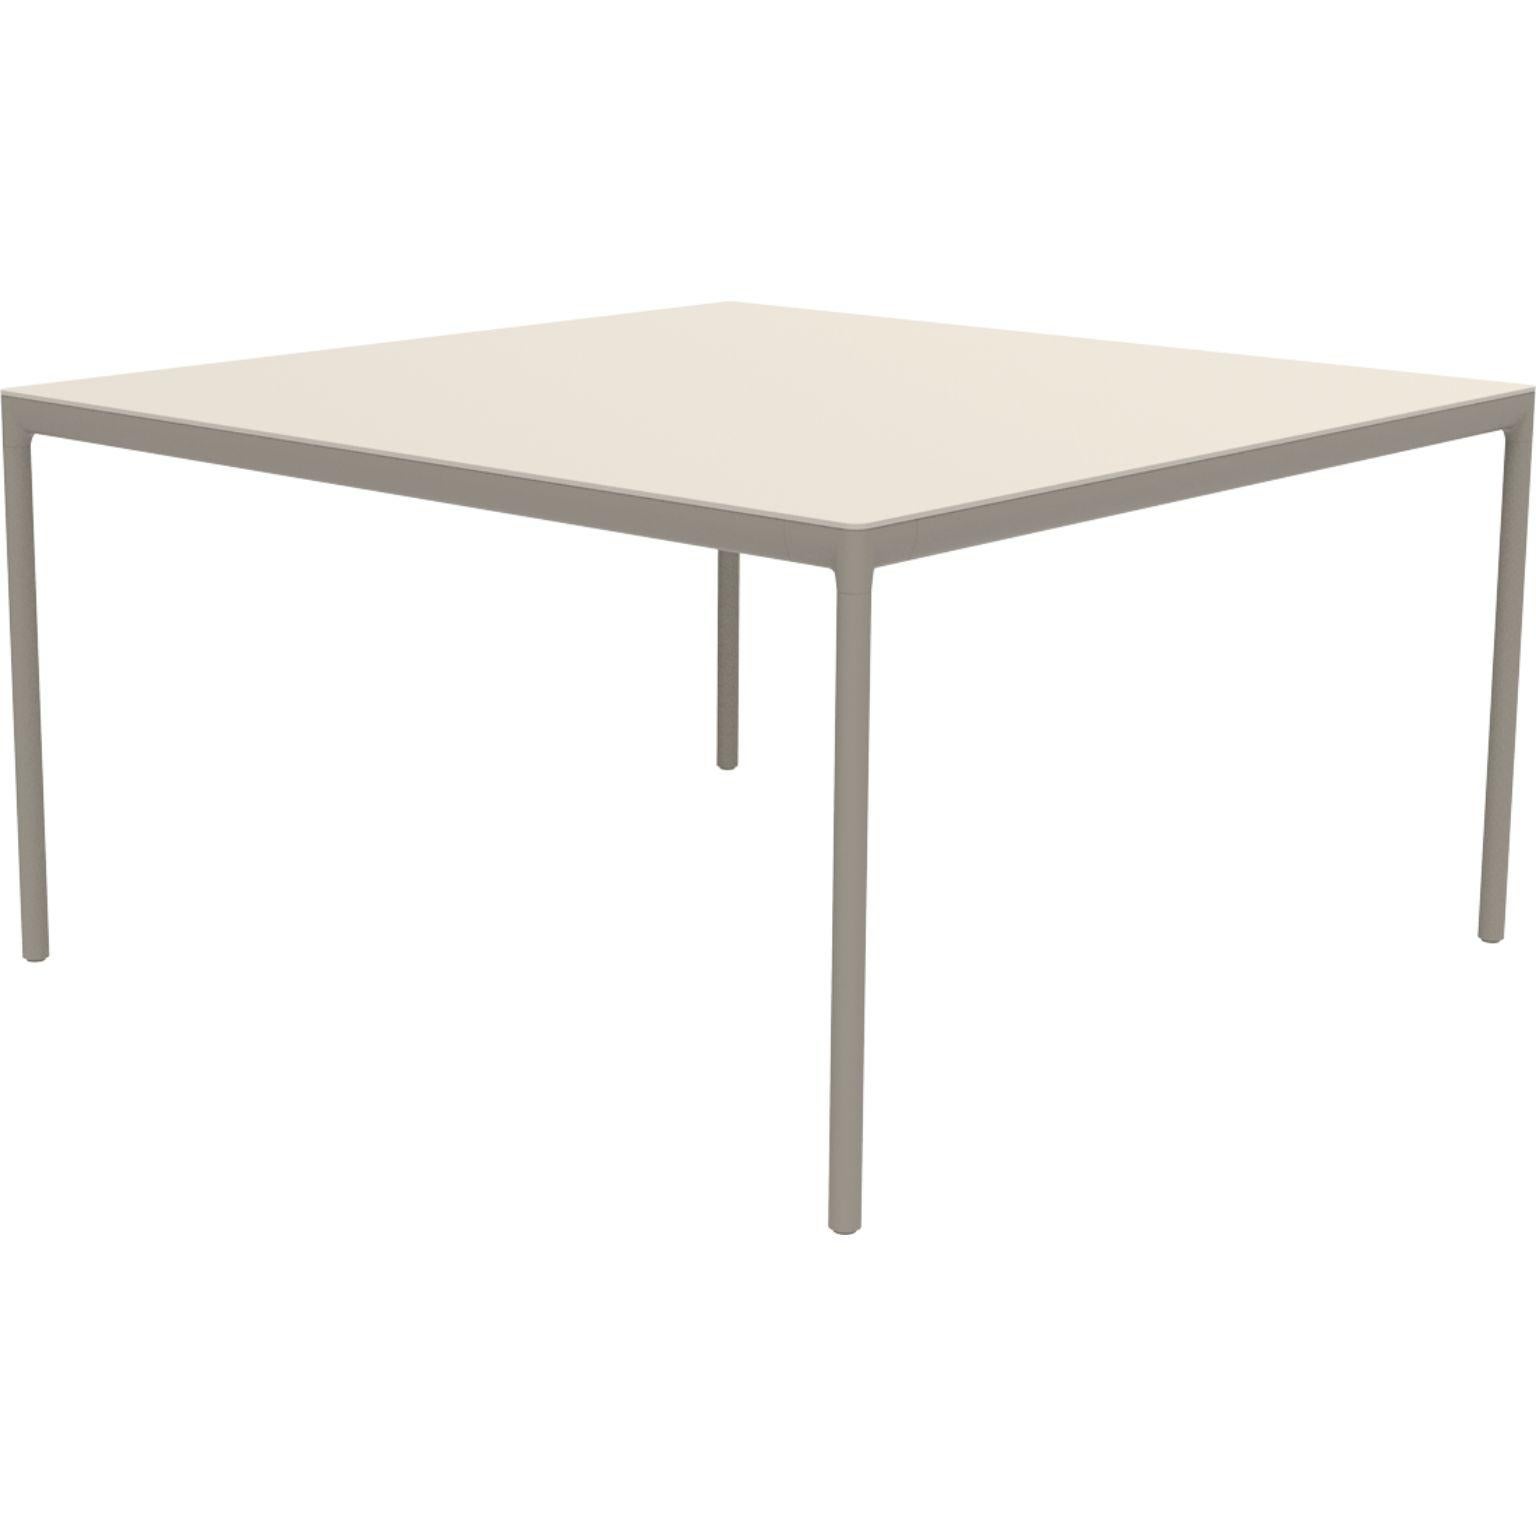 Ribbons cream 138 coffee table by MOWEE.
Dimensions: D138 x W138 x H75 cm.
Material: Aluminum and HPL top.
Weight: 23 kg.
Also available in different colors and finishes. (HPL Black Edge or Neolith top). 

An unmistakable collection for its beauty